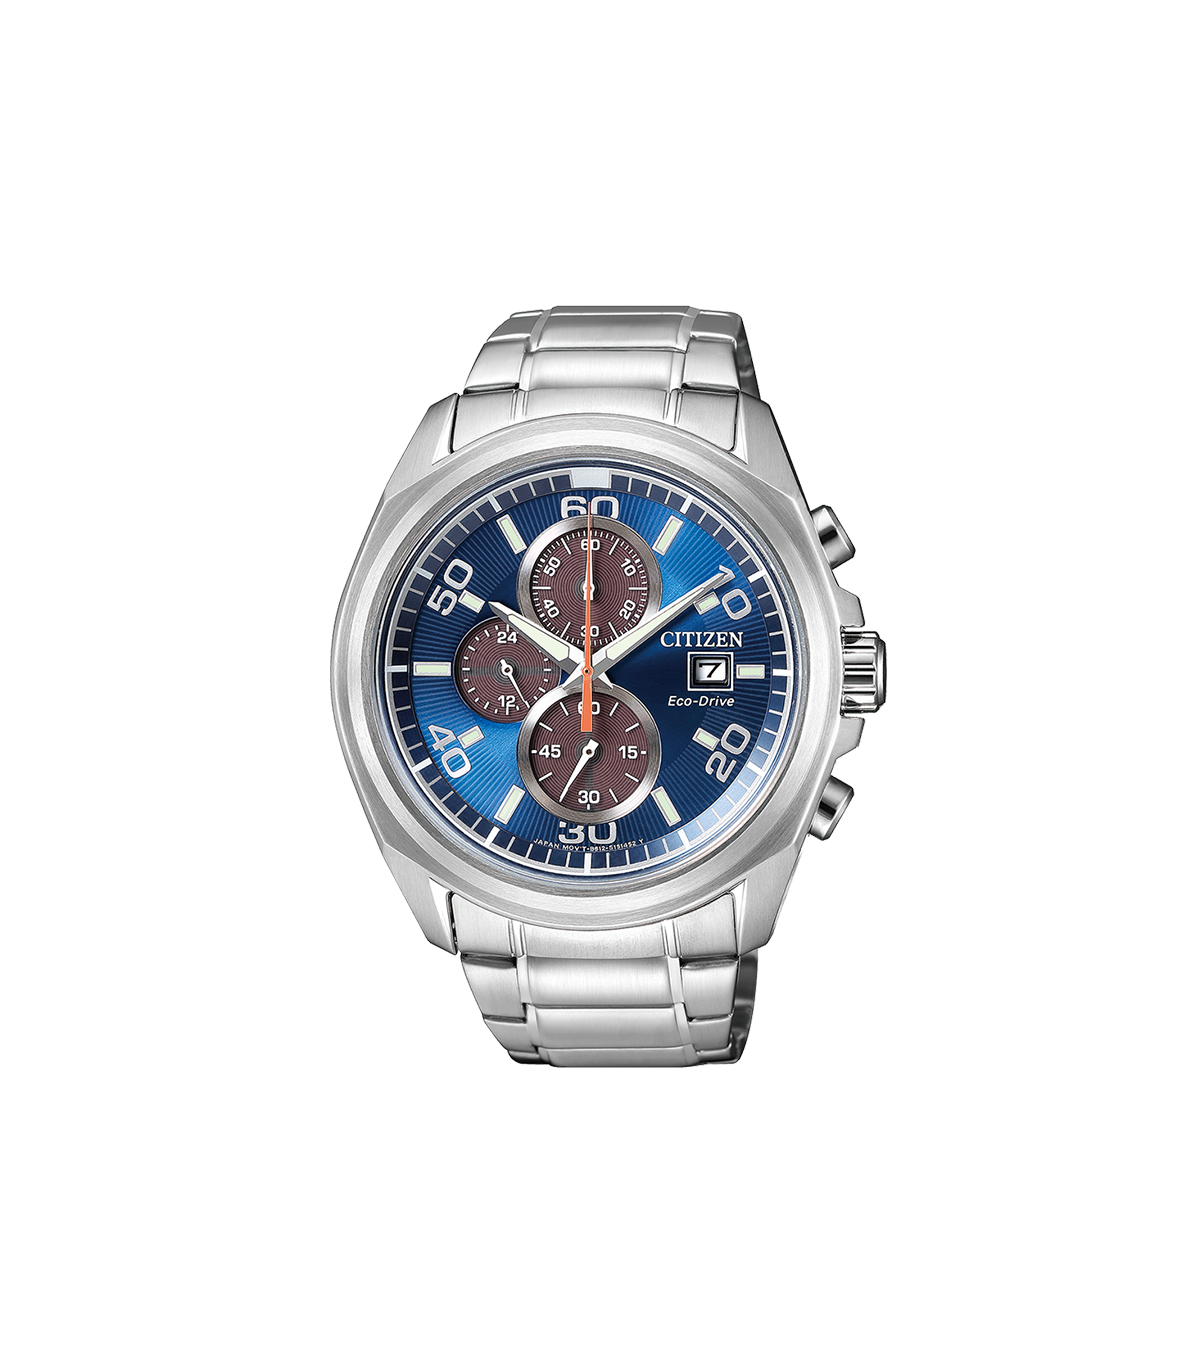 CITIZEN CRONO WATCH OF 0 COLLECTION -